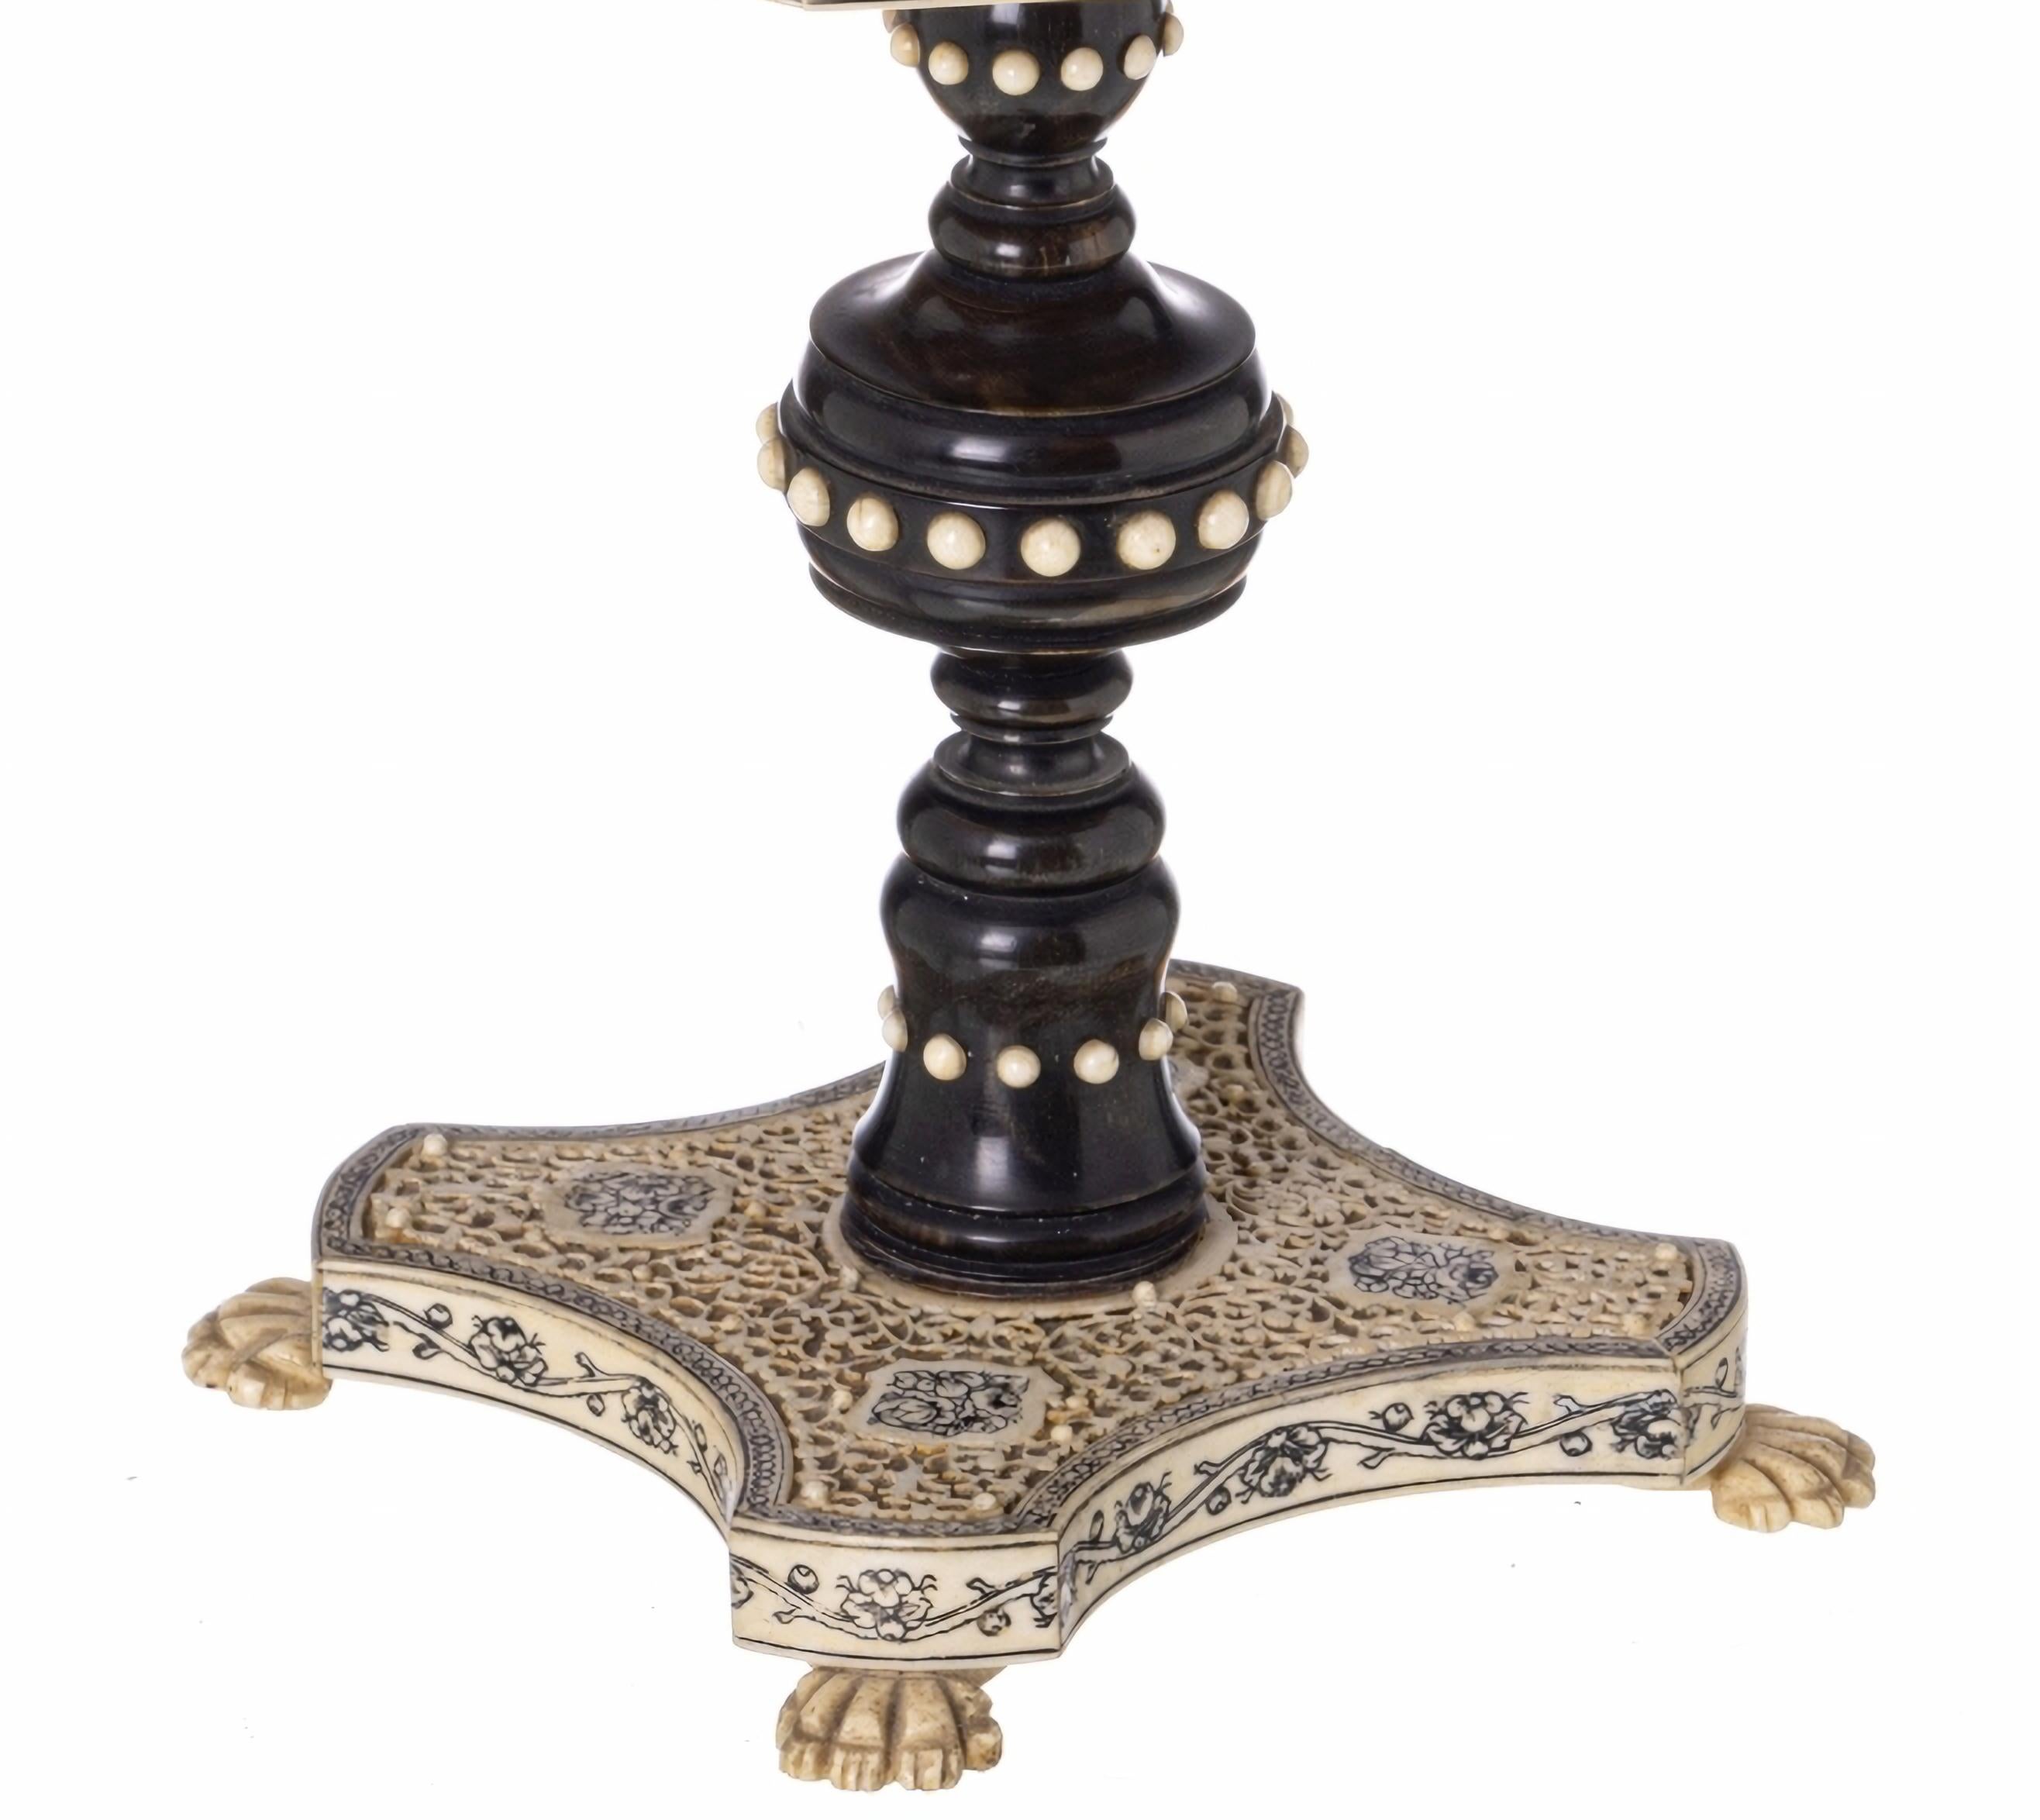 English MINIATURE GAME TABLE WITH CHESS PIECES  19th Century Anglo-Indian  For Sale